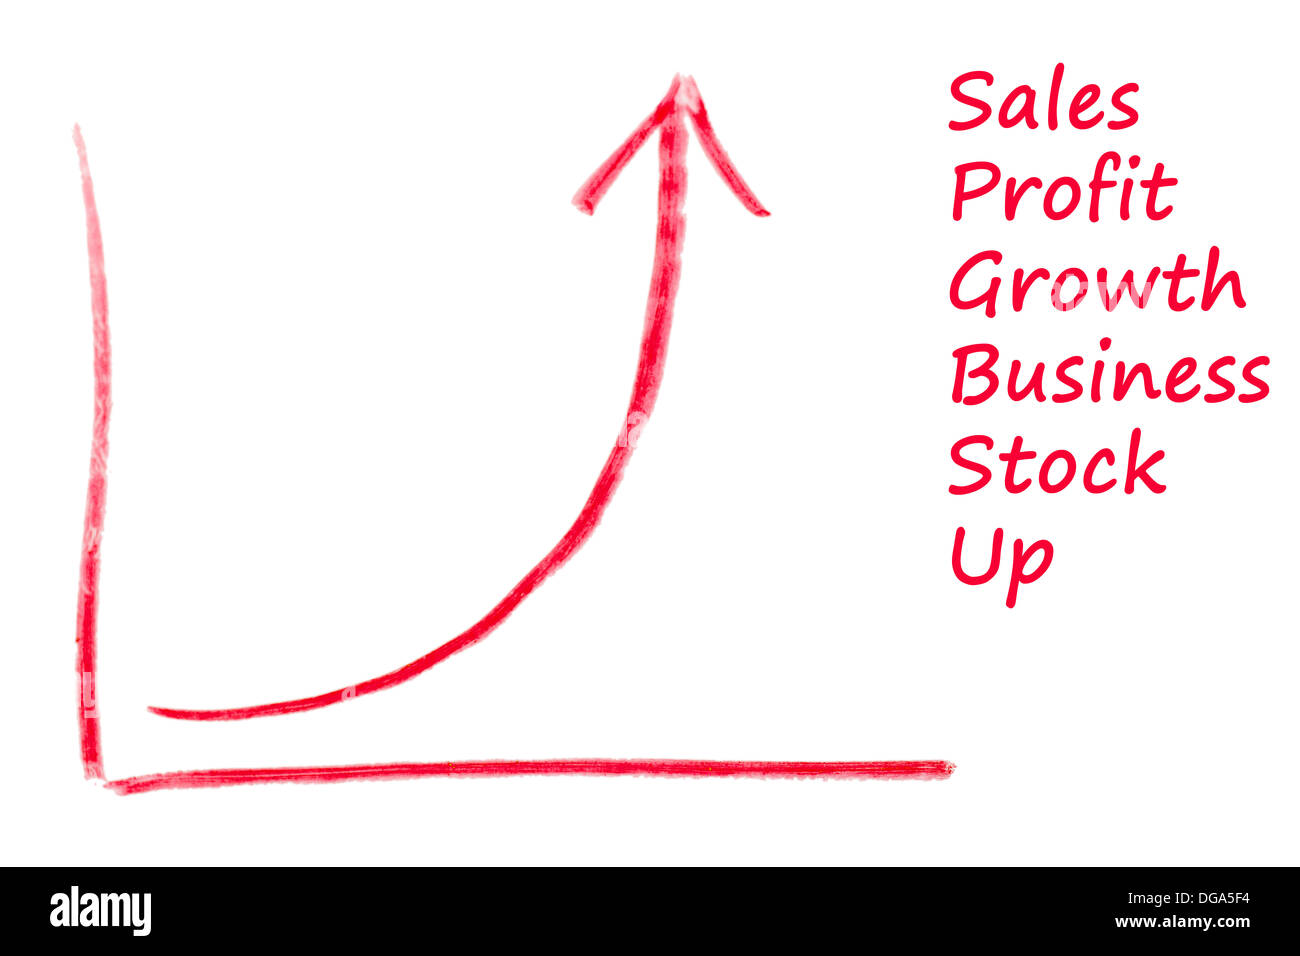 Hand drawn up or exponential growth curve and arrow on graphic, great details Stock Photo